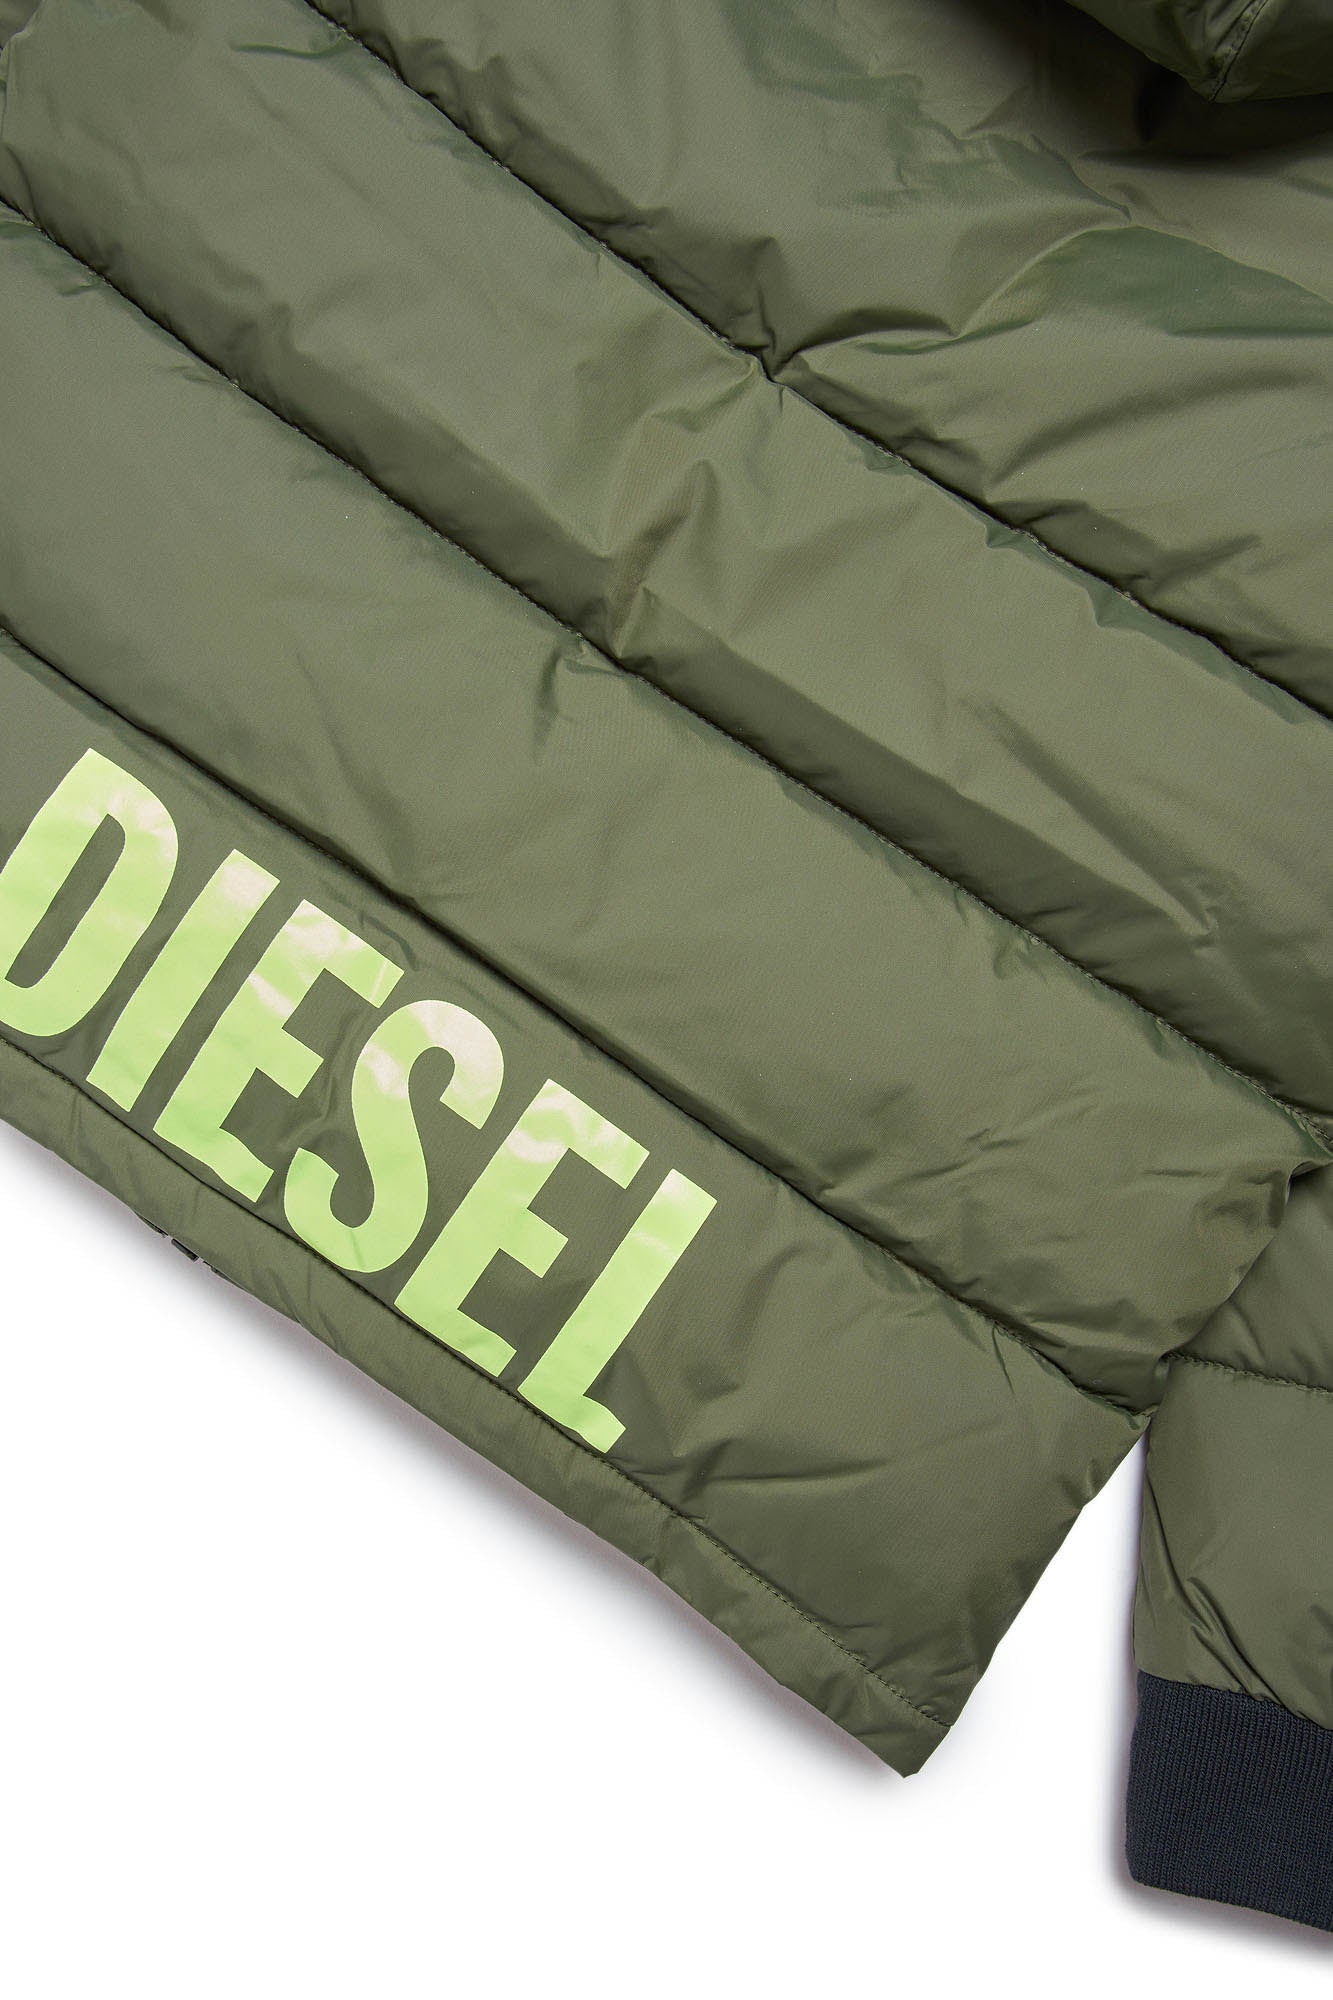 Diesel green down jacket with logo on the back | Brave Kid